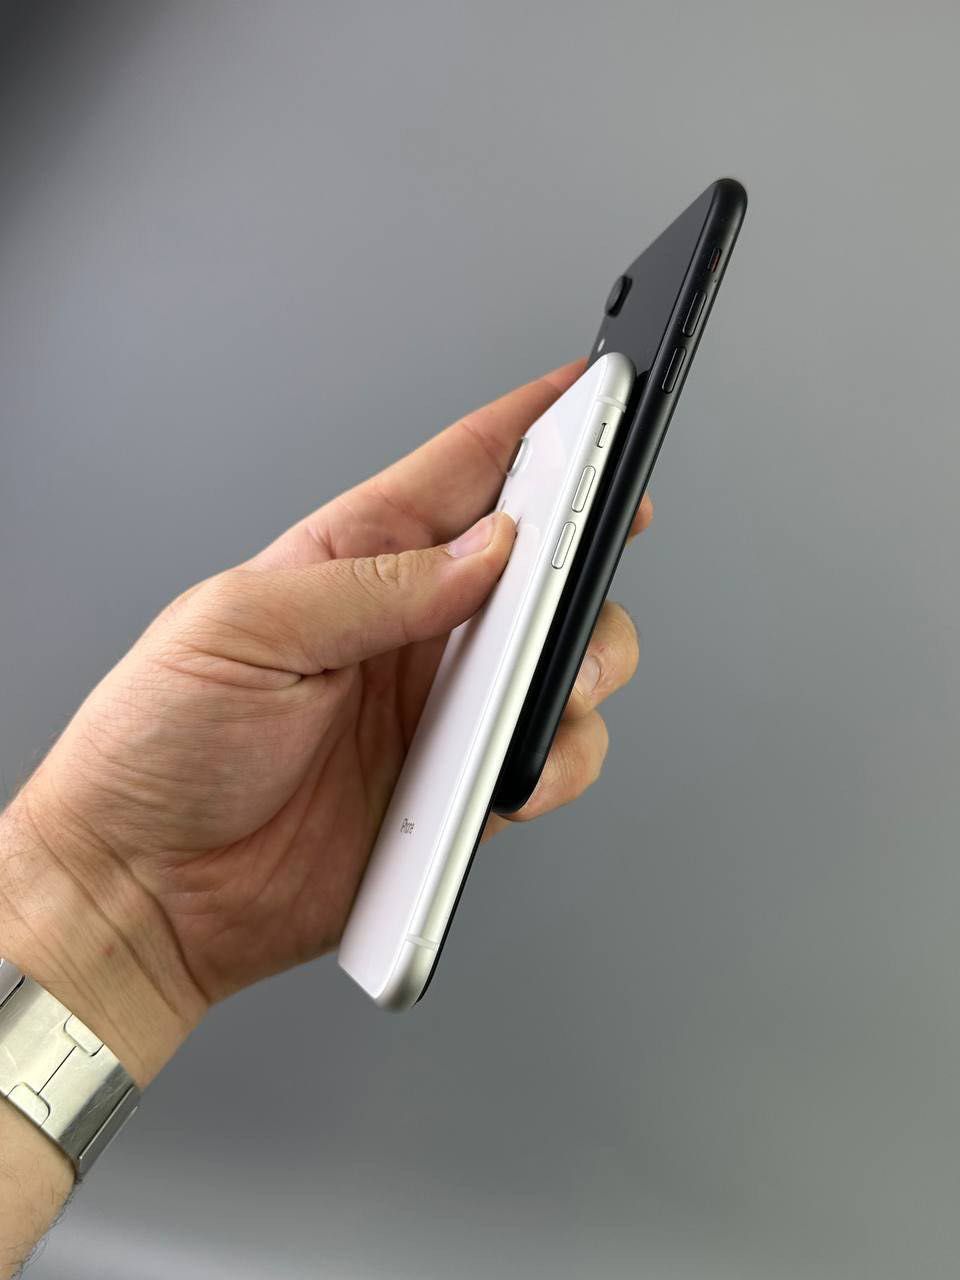 iPhone XR 64 gb black and white